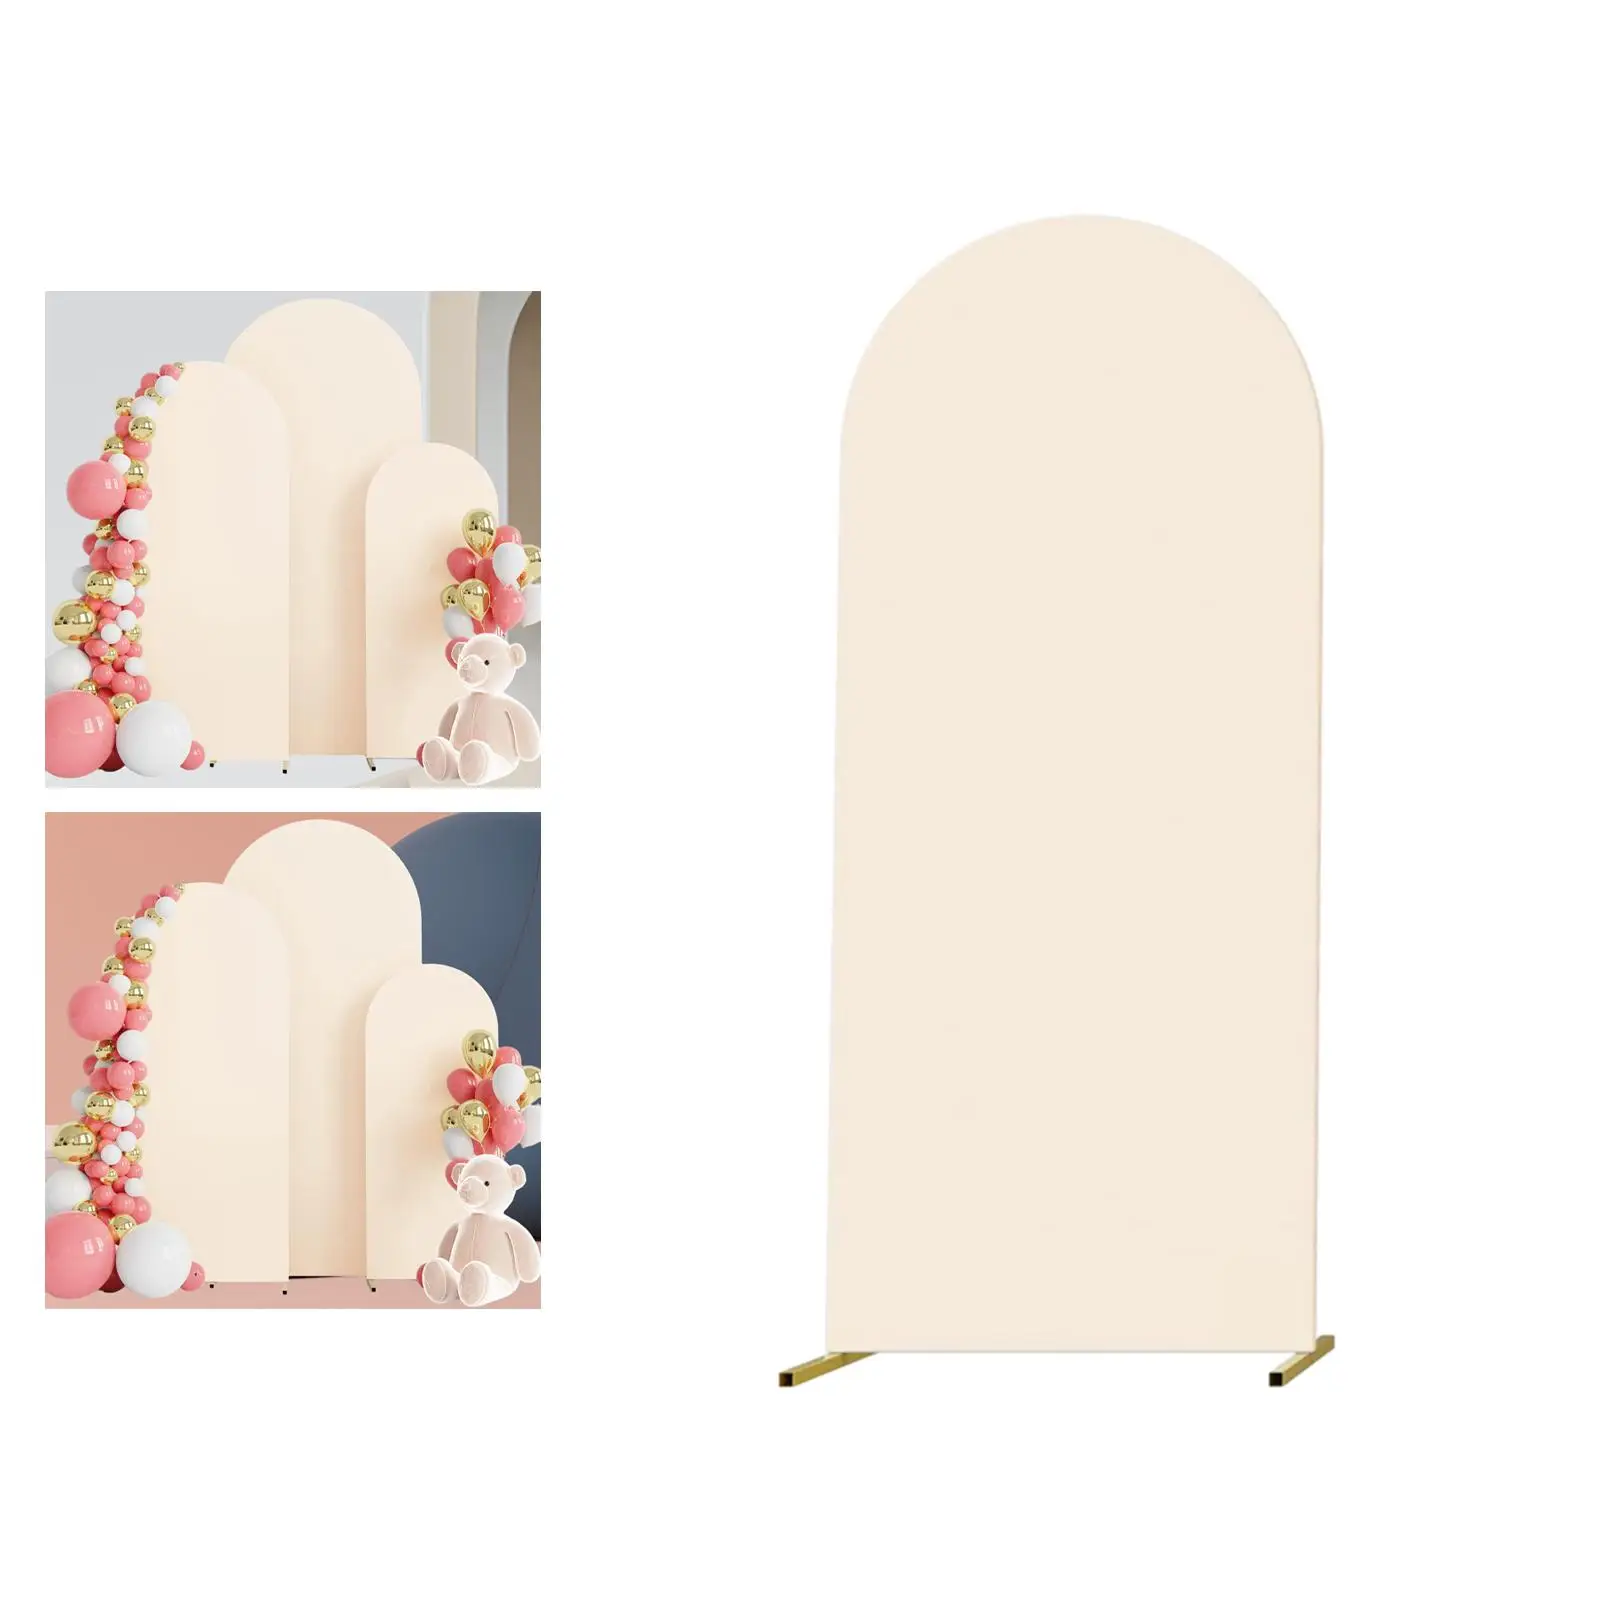 Wedding Arch Stand Covers Party Decor Decorative Wedding Ornaments for Engagement Parties Wedding Photo Props Birthday Ceremony